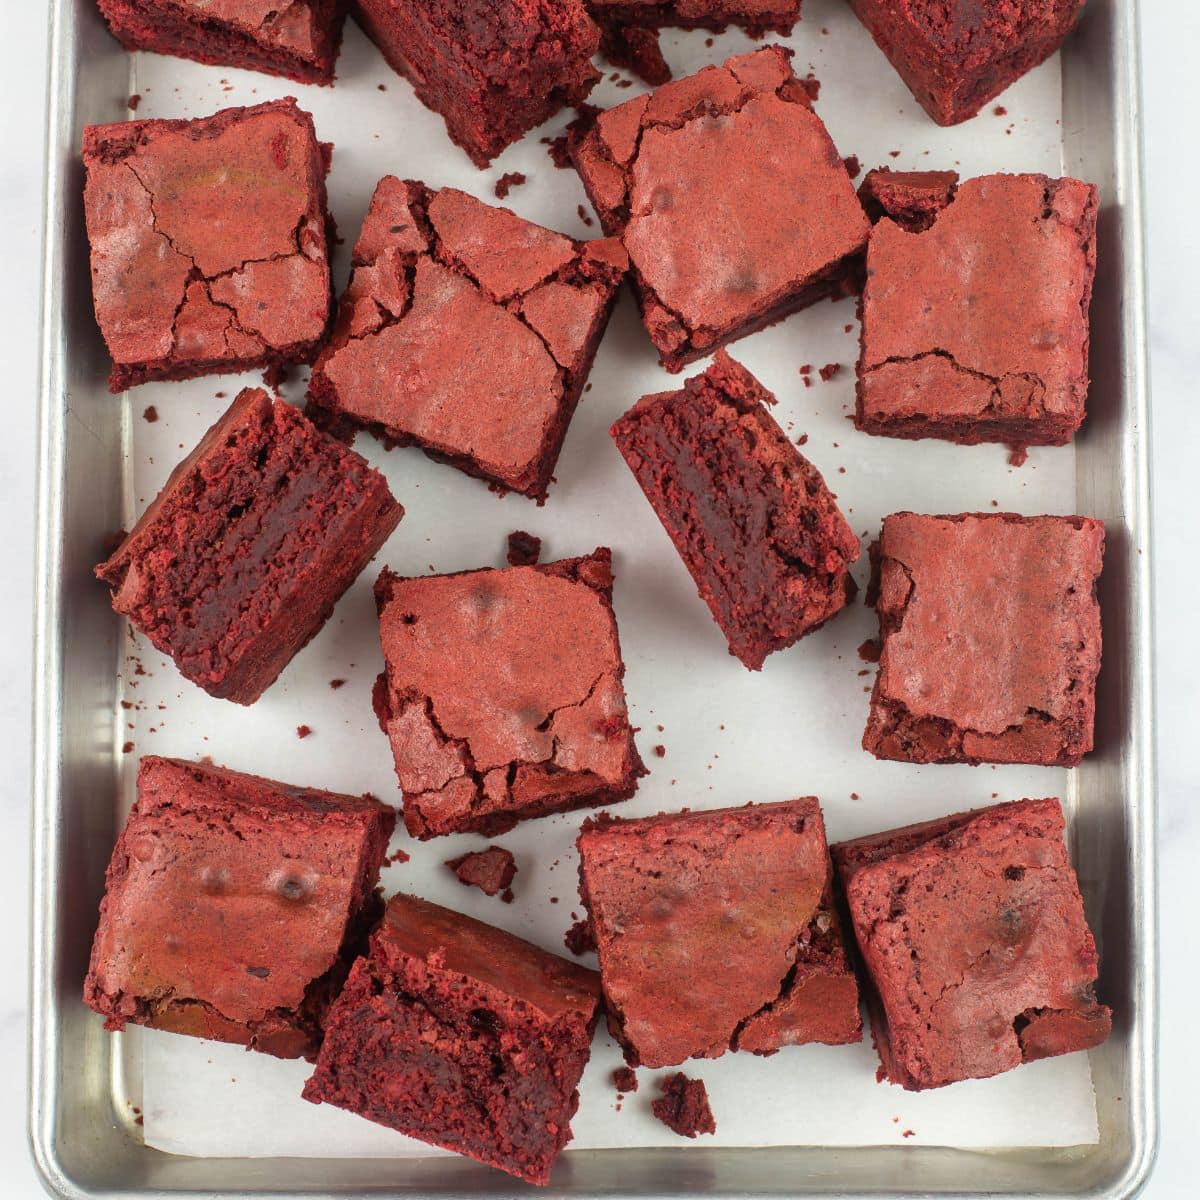 Red Velvet Brownies cut into squares on a baking sheet.